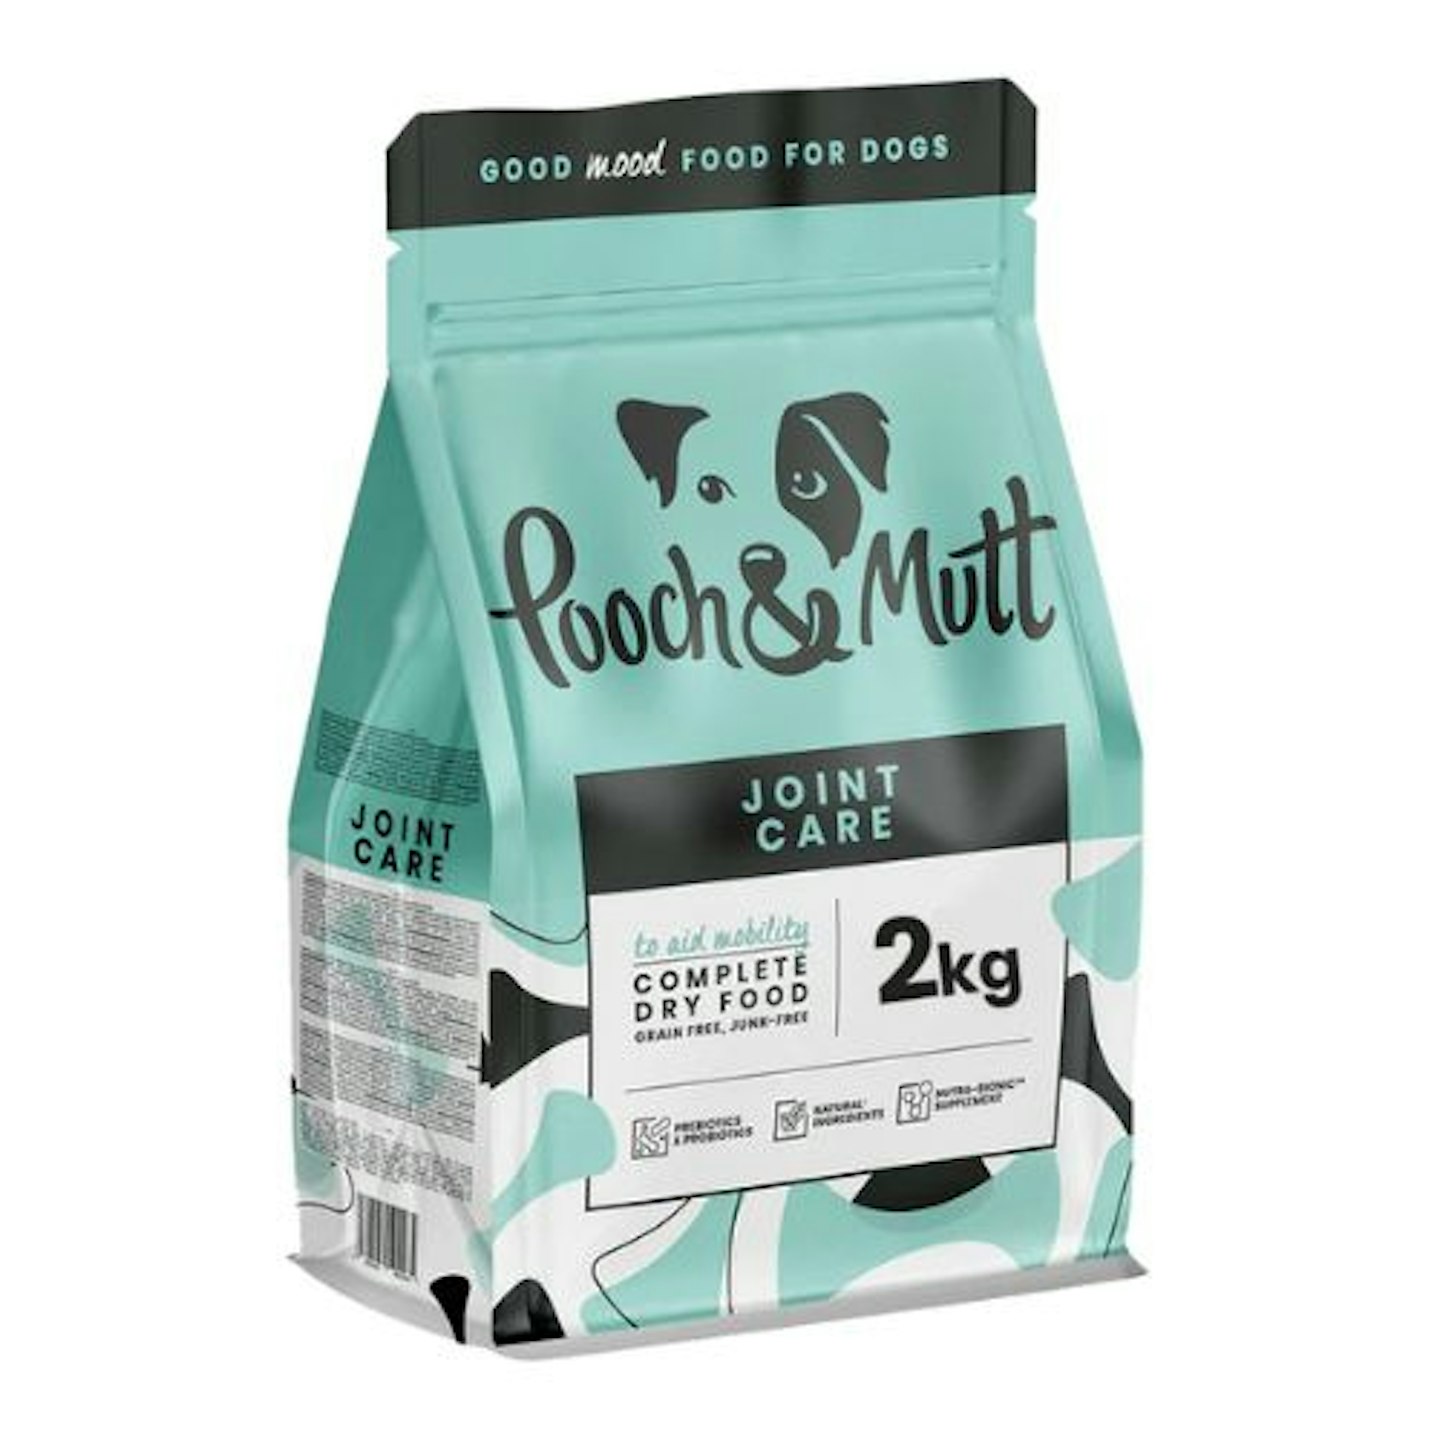 Pooch & Mutt Joint Care Dry Food